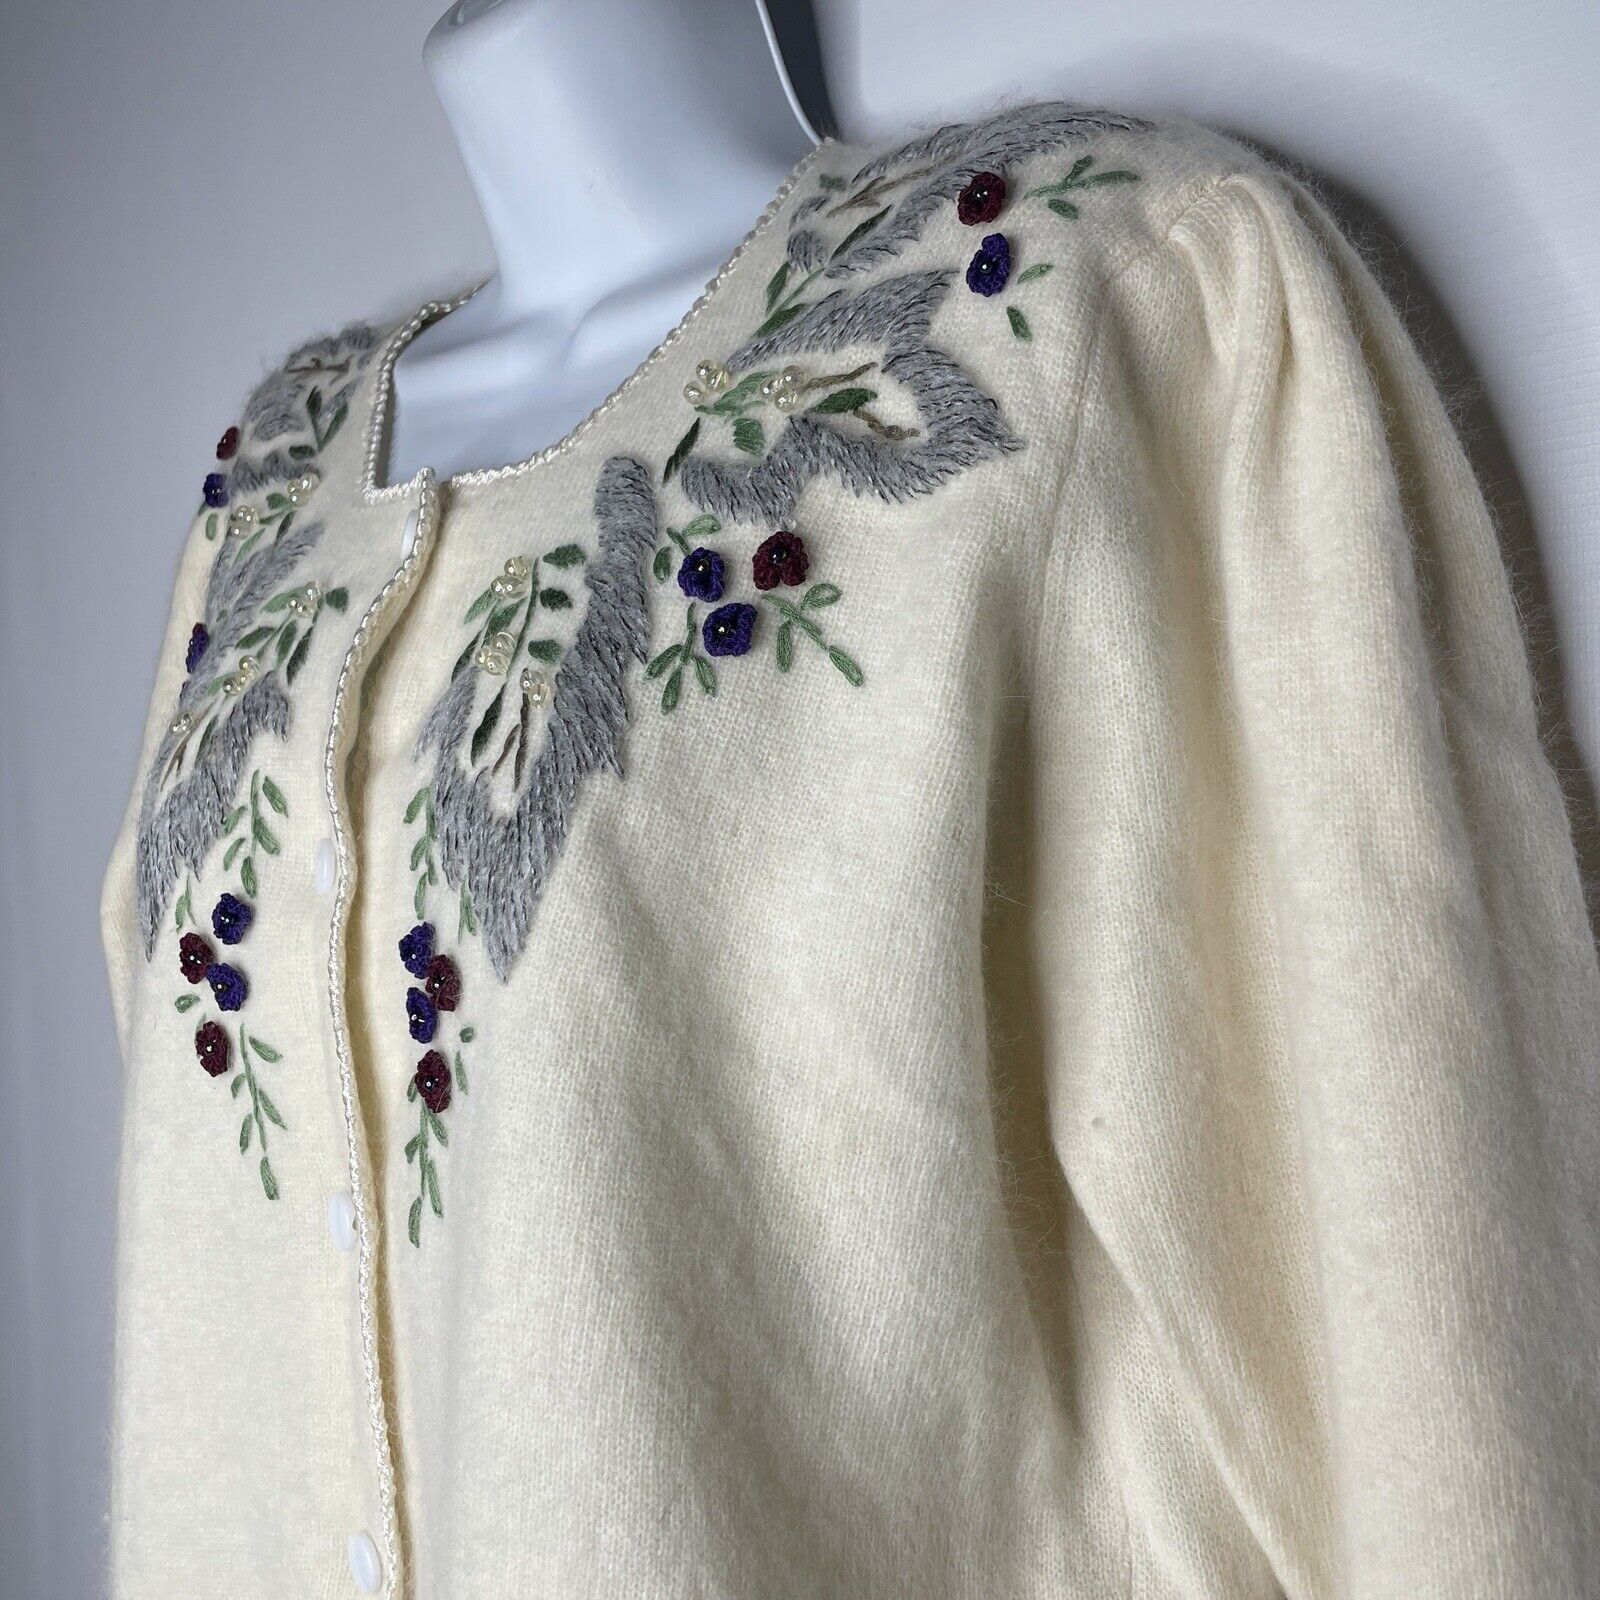 Vintage 80s Ivory Floral Embroidered Beaded Fuzzy Cardigan Sweater Size L / US 10 / IT 46 - 7 Thumbnail